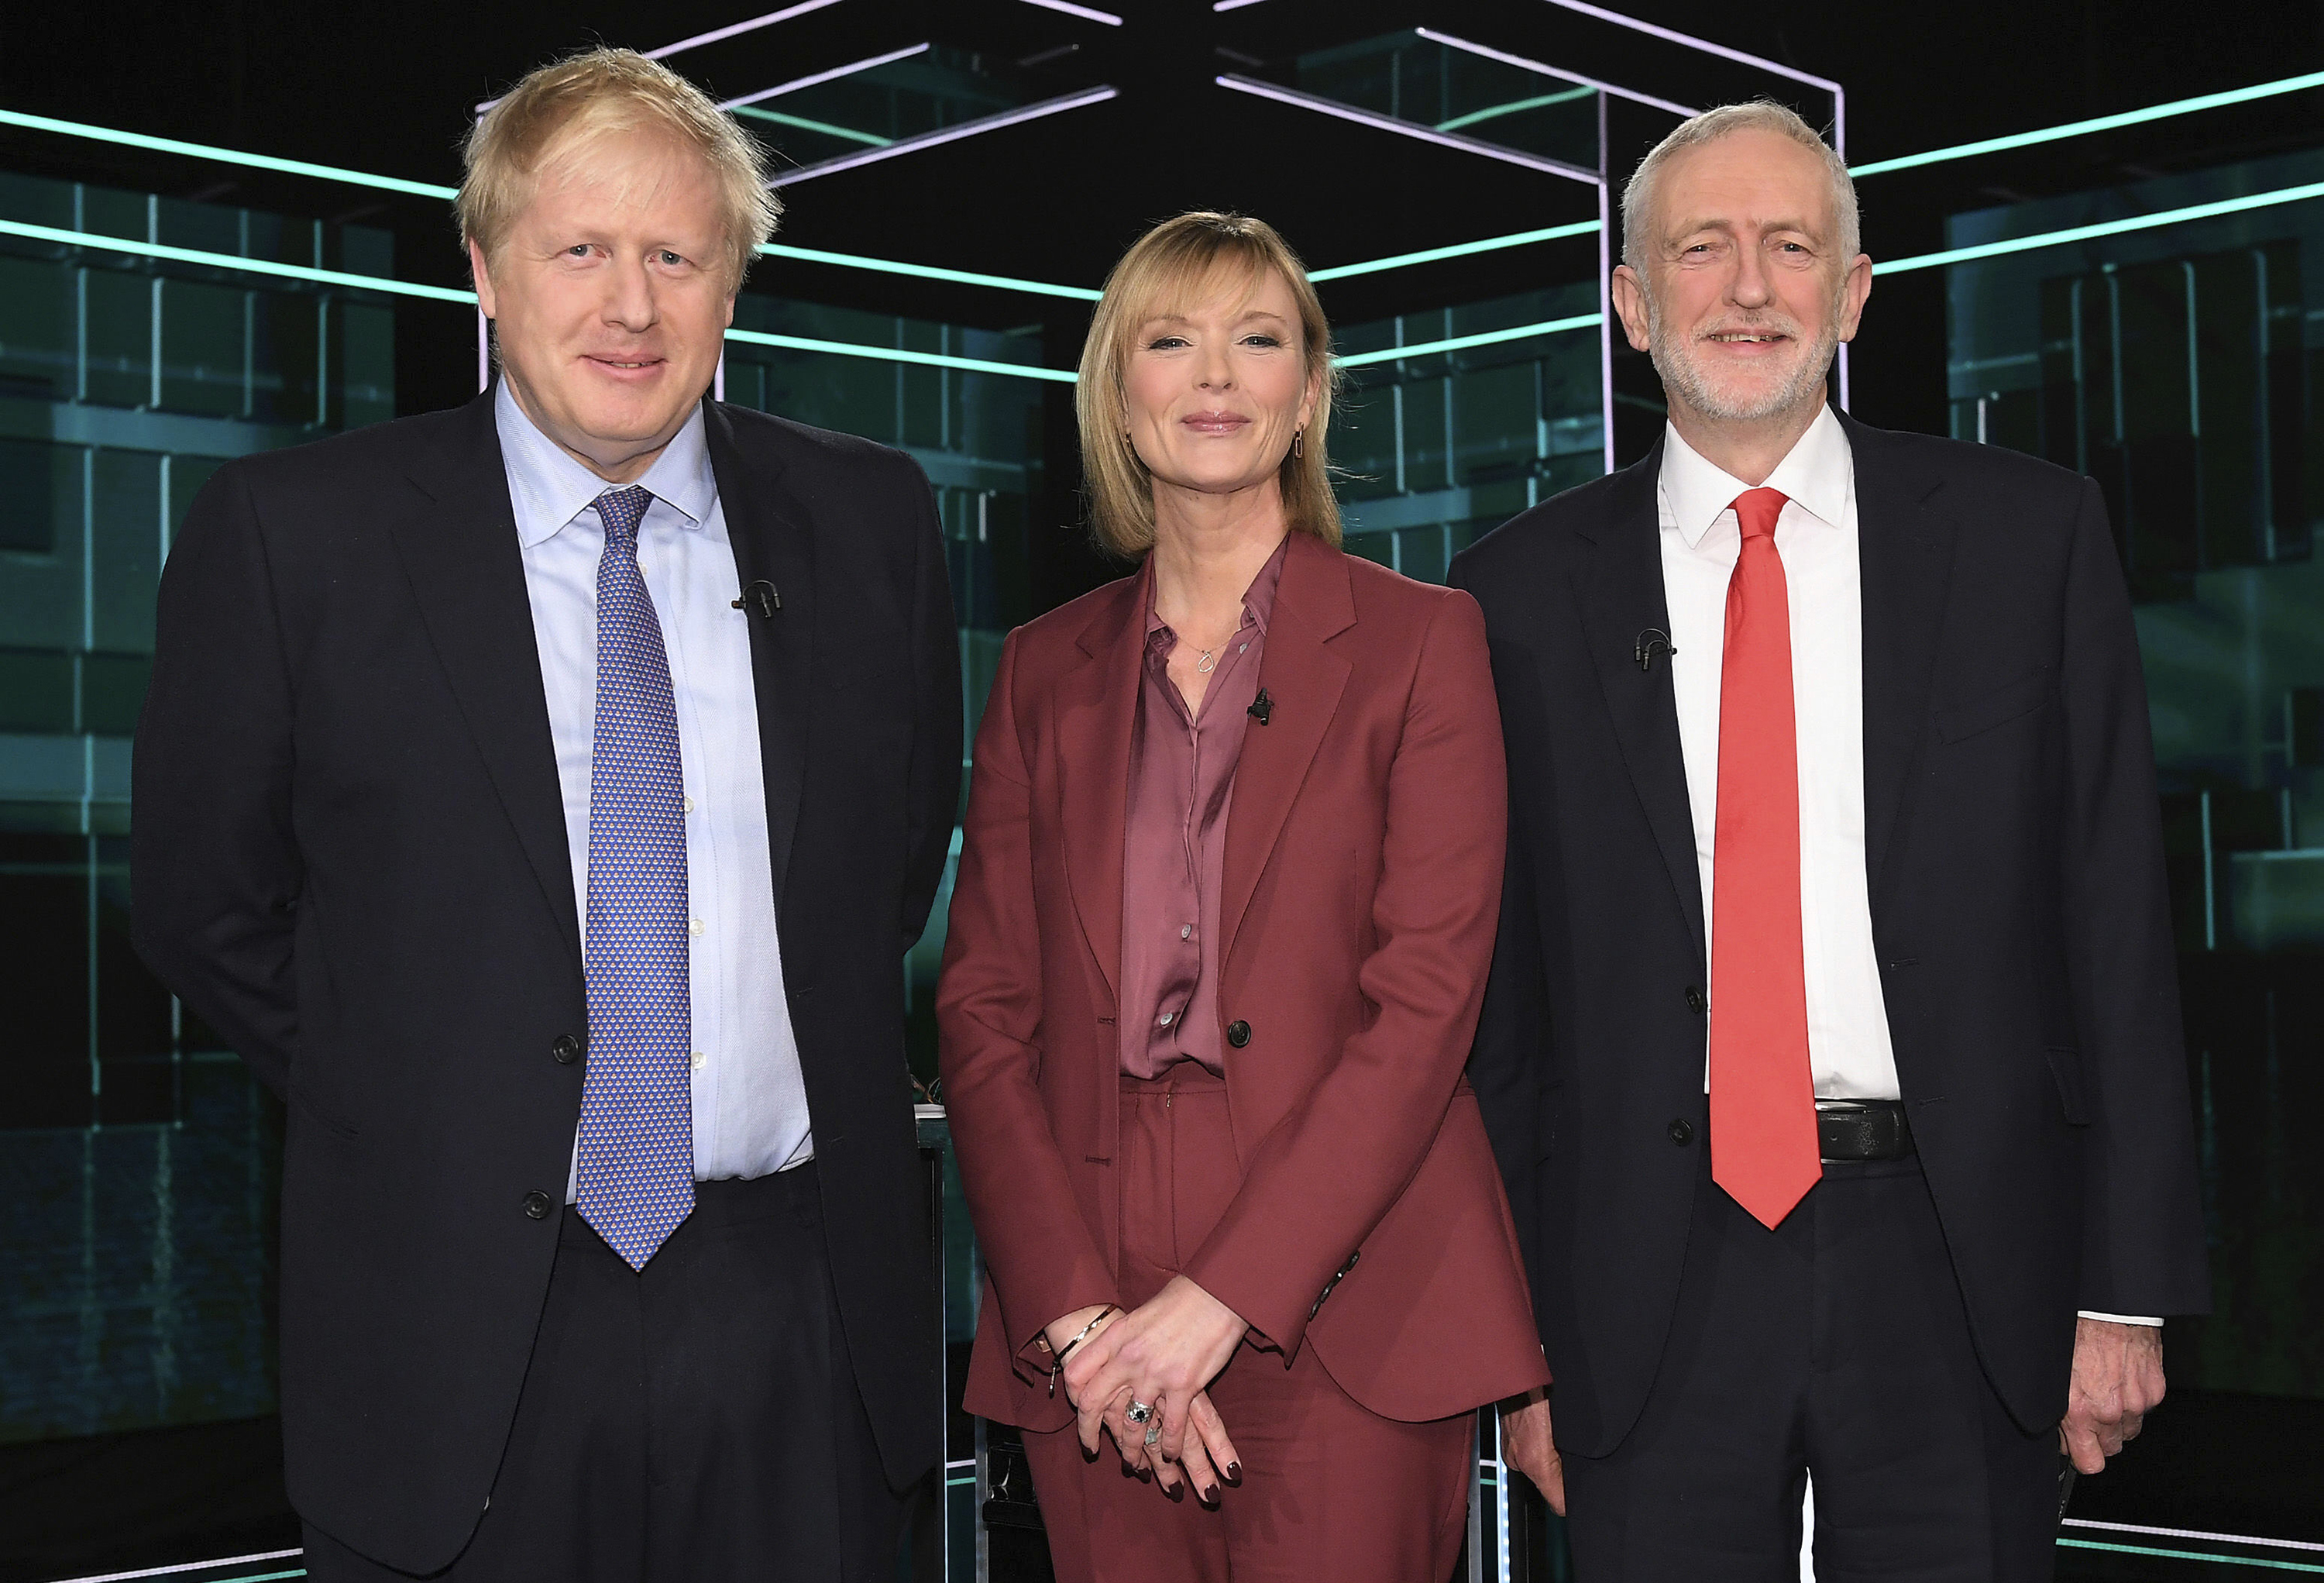 Boris Johnson and Jeremy Corbyn with TV debate adjudicator Julie Etchingham, prior to their election head-to-head debate live on TV in Manchester, England on Tuesday.